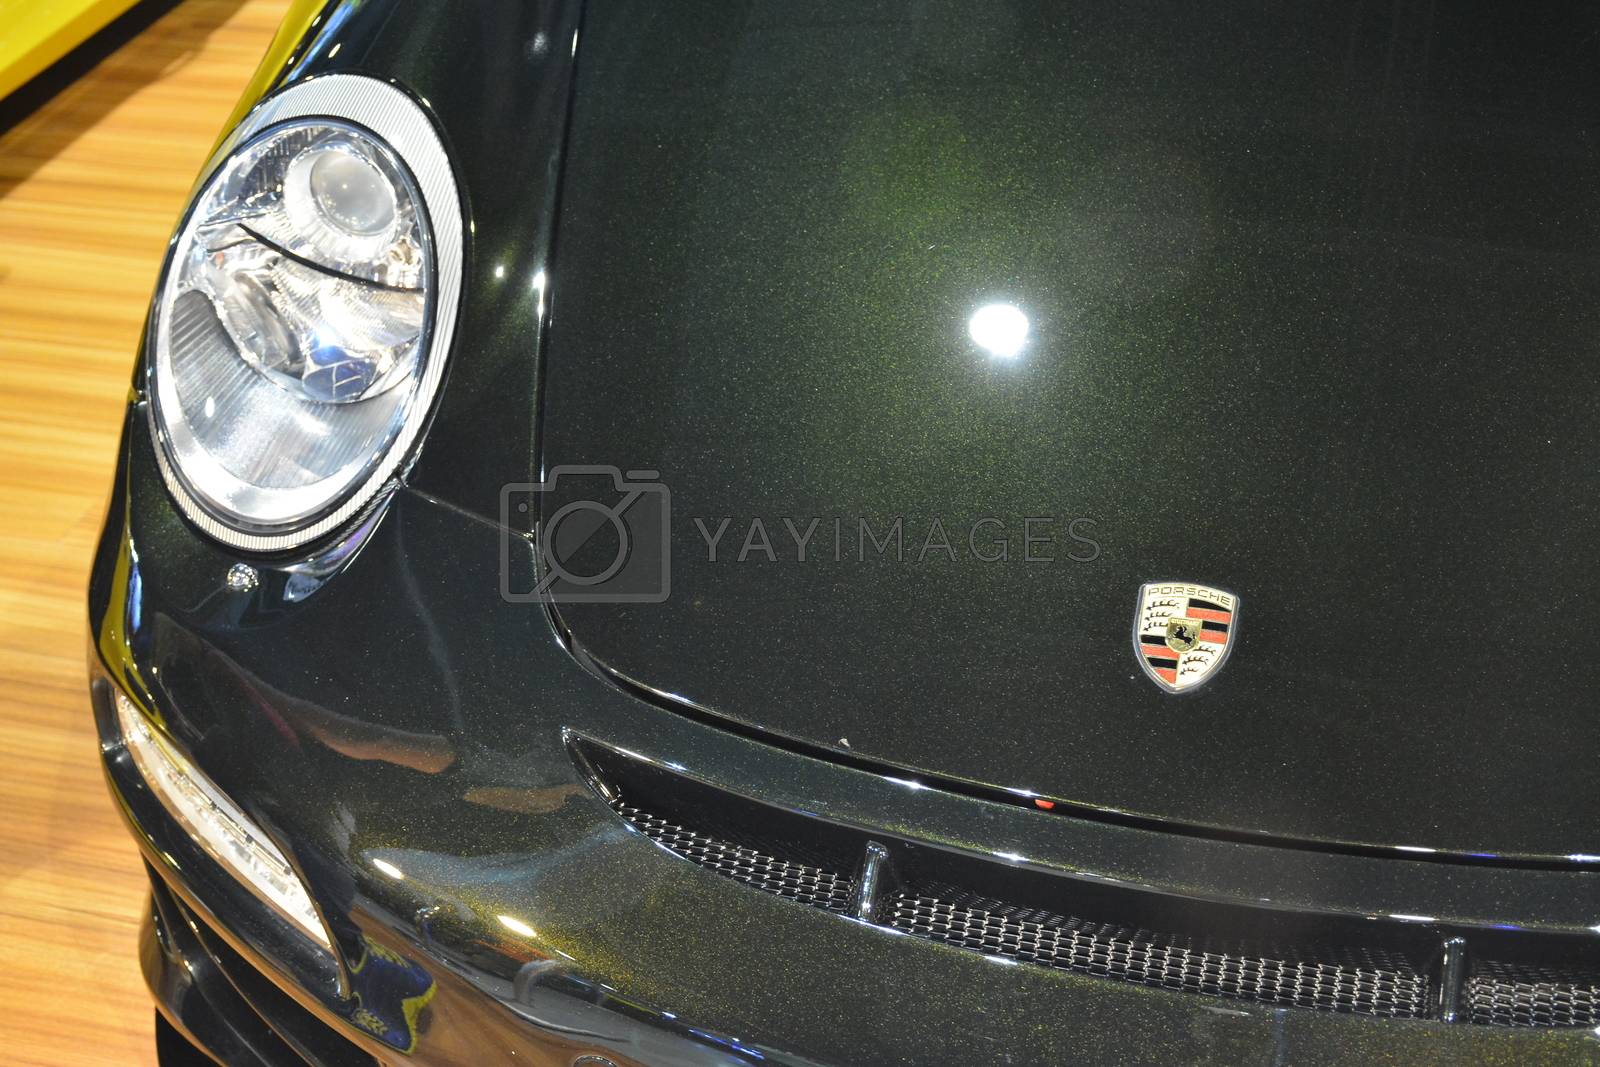 Royalty free image of Porsche sports car at Manila Auto Salon car show in Pasay, Phili by imwaltersy